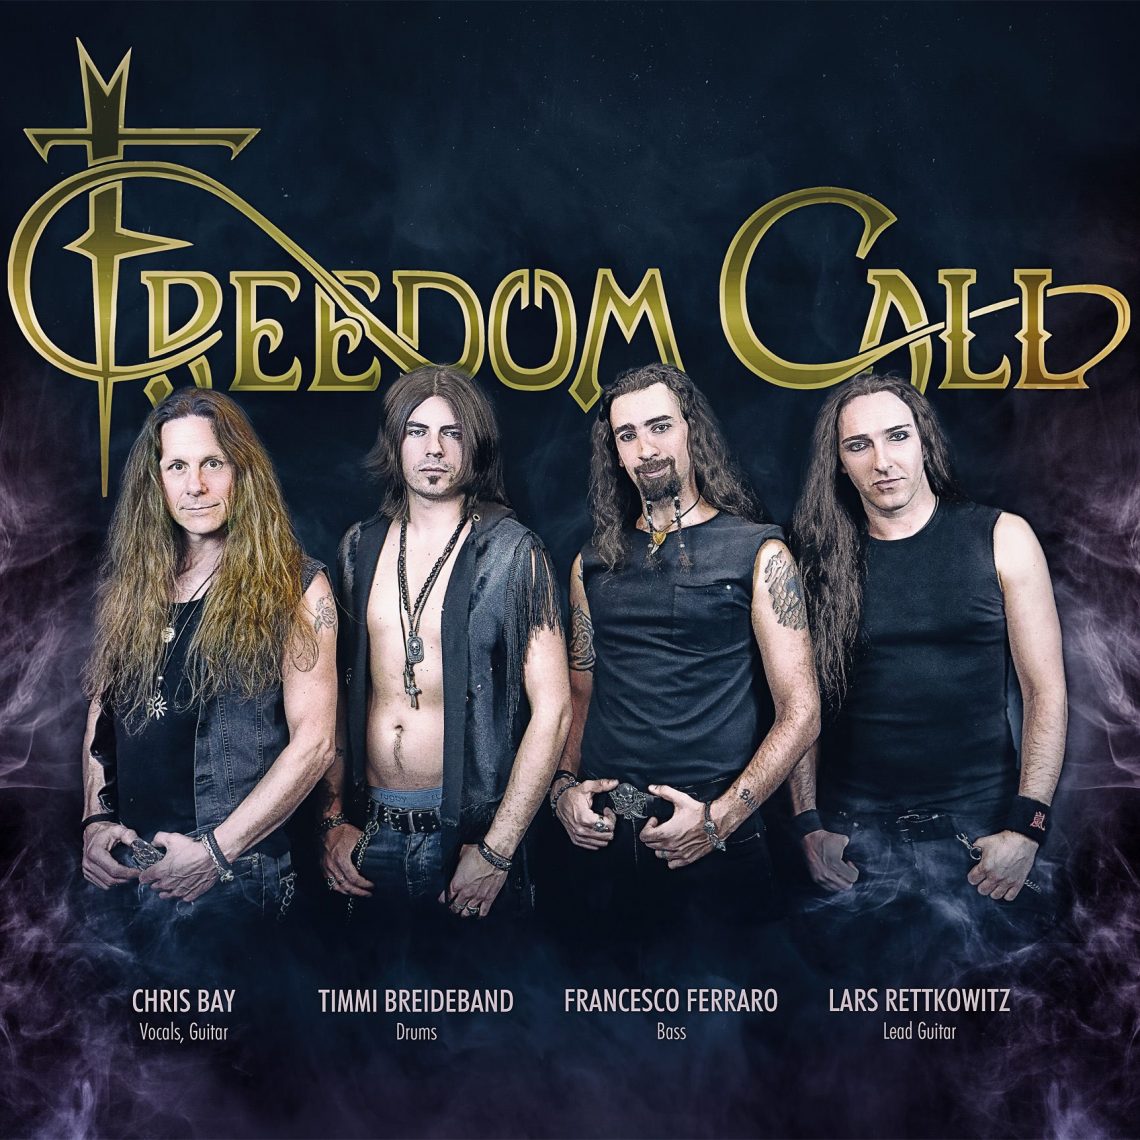 FREEDOM CALL releases tour teaser for fall tour / new album in August!